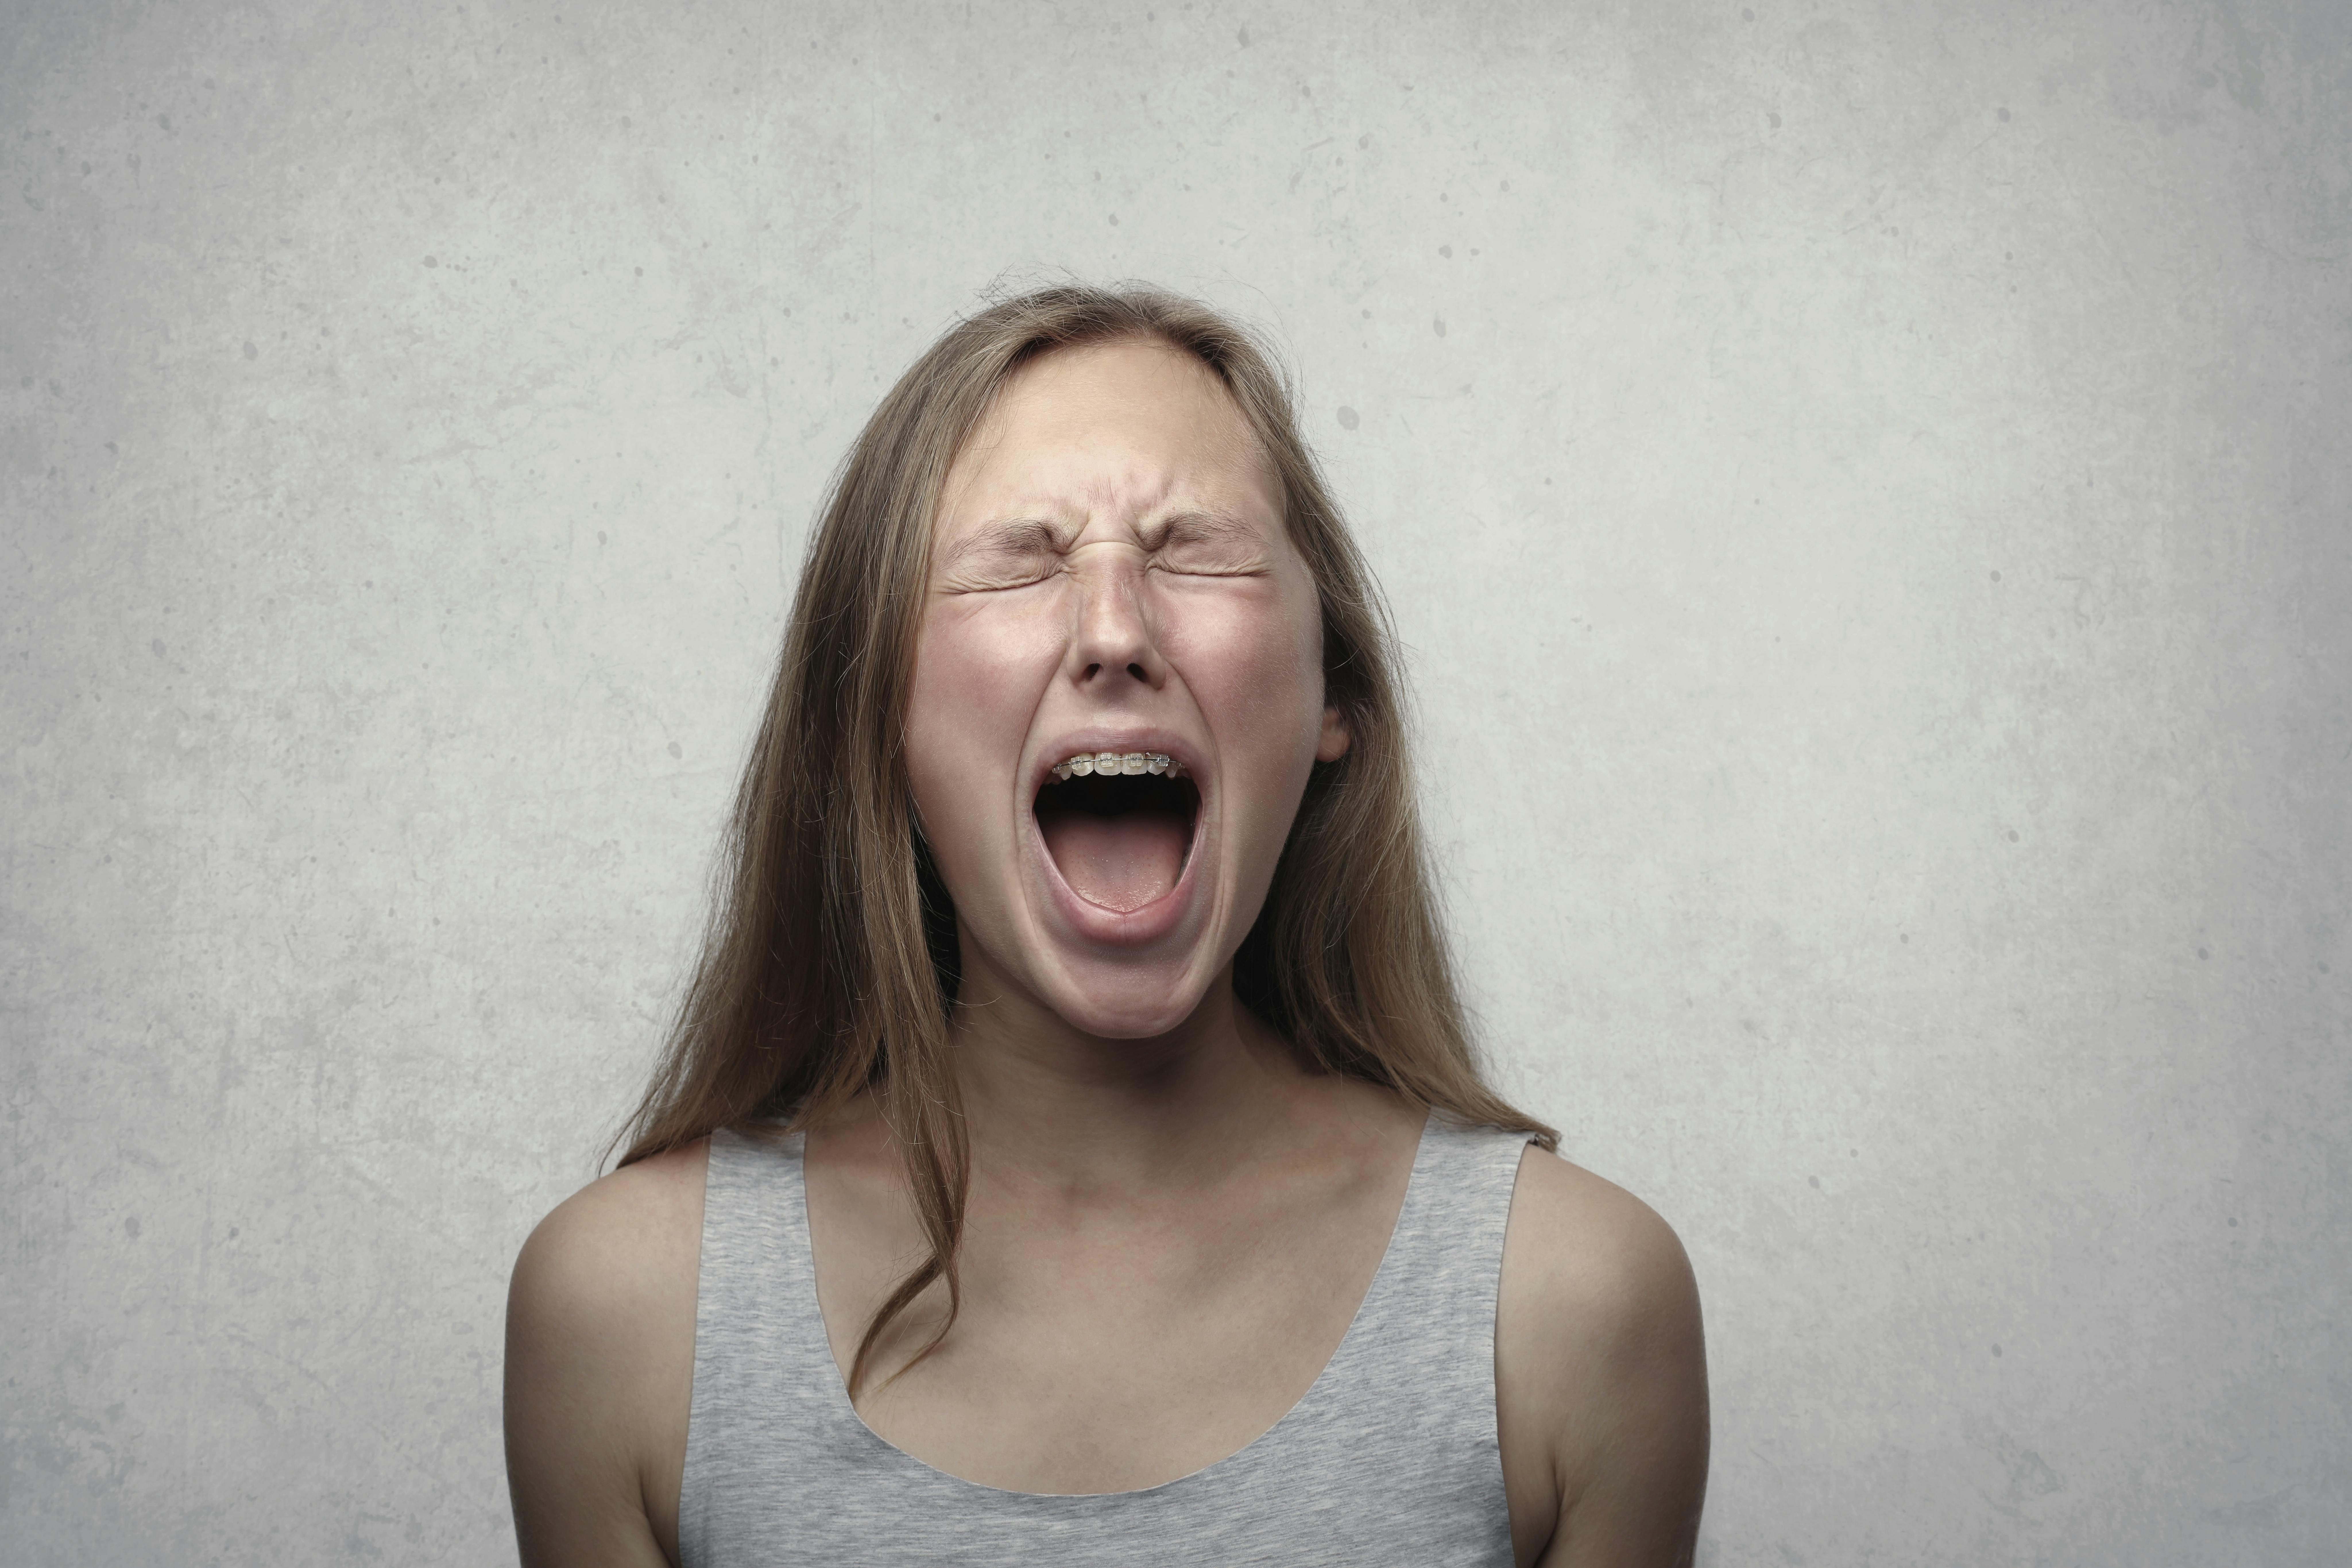 A teenage girl screaming her lungs out | Source: Pexels